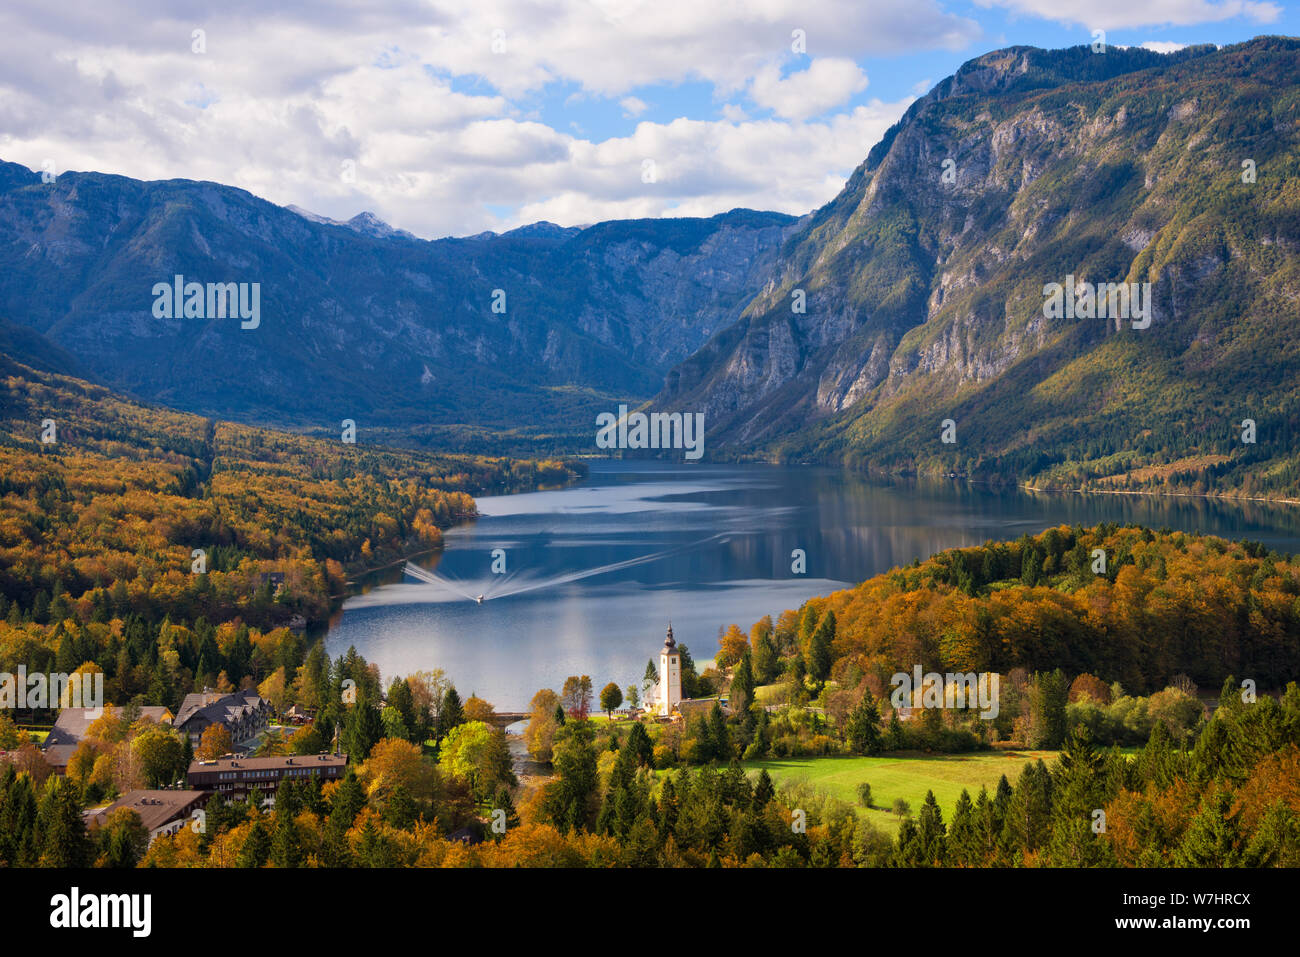 A ferry boat towards the town of Ribčev Laz next to Lake Bohinj and trees in autumn colors and Julian Alps mountains in a fall landscape in Slovenia. Stock Photo